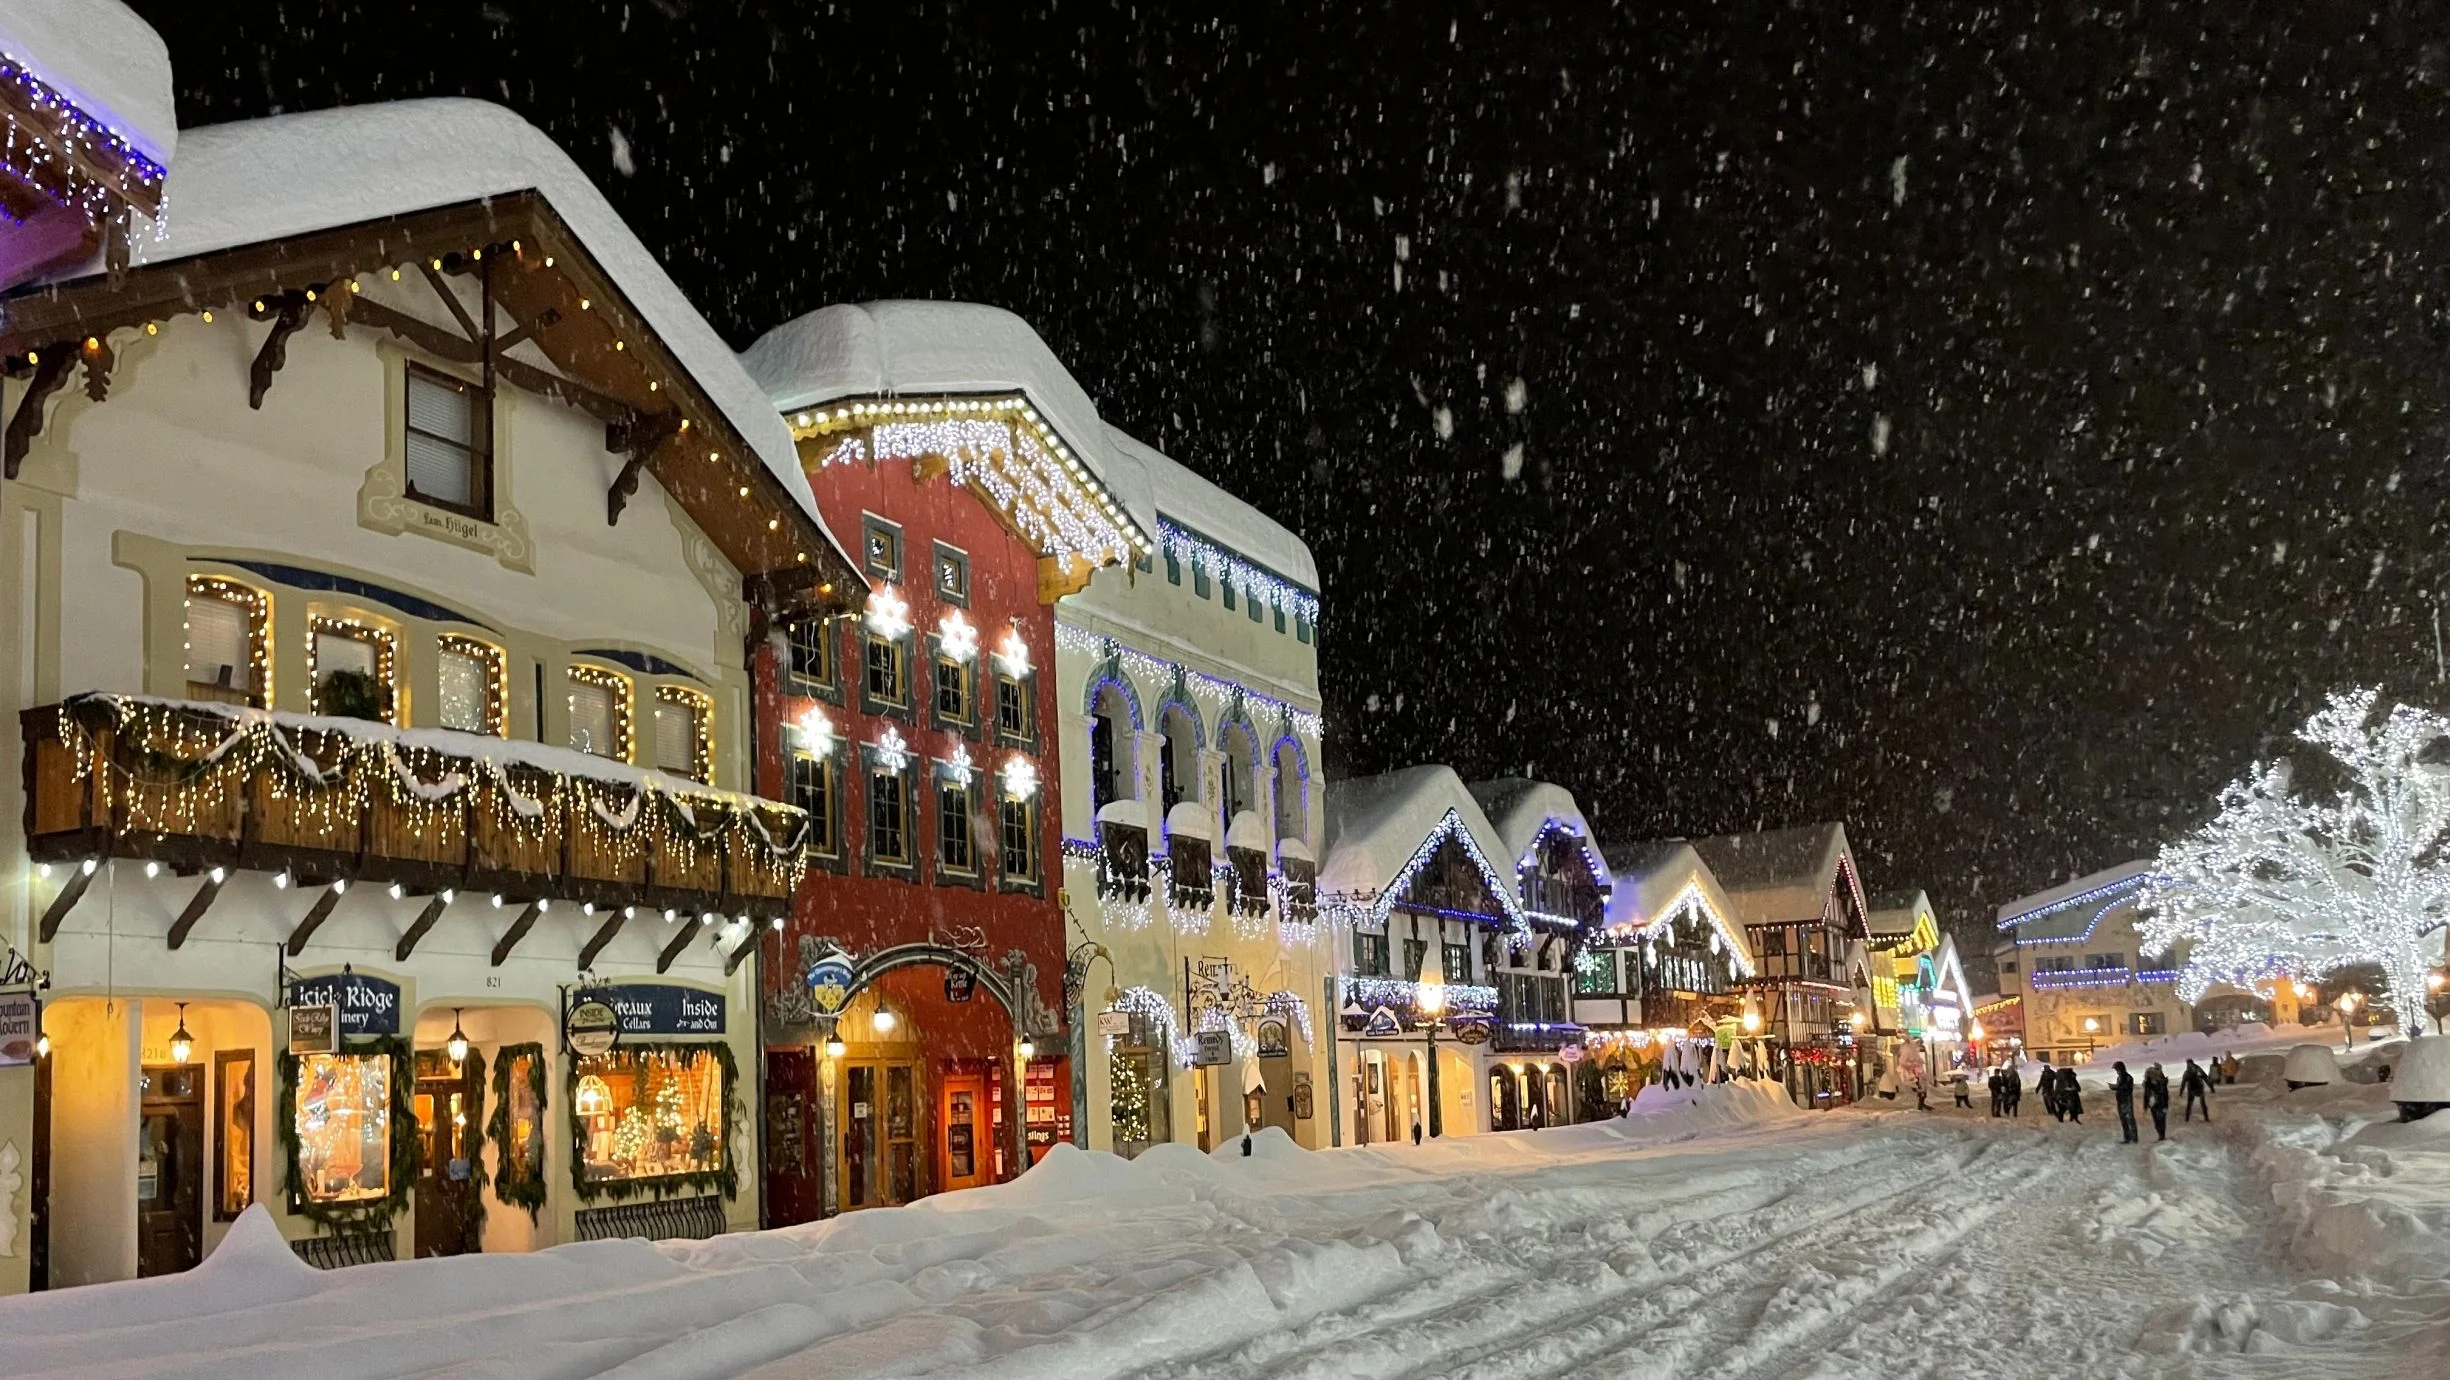 View of town of Leavenworth in Winter